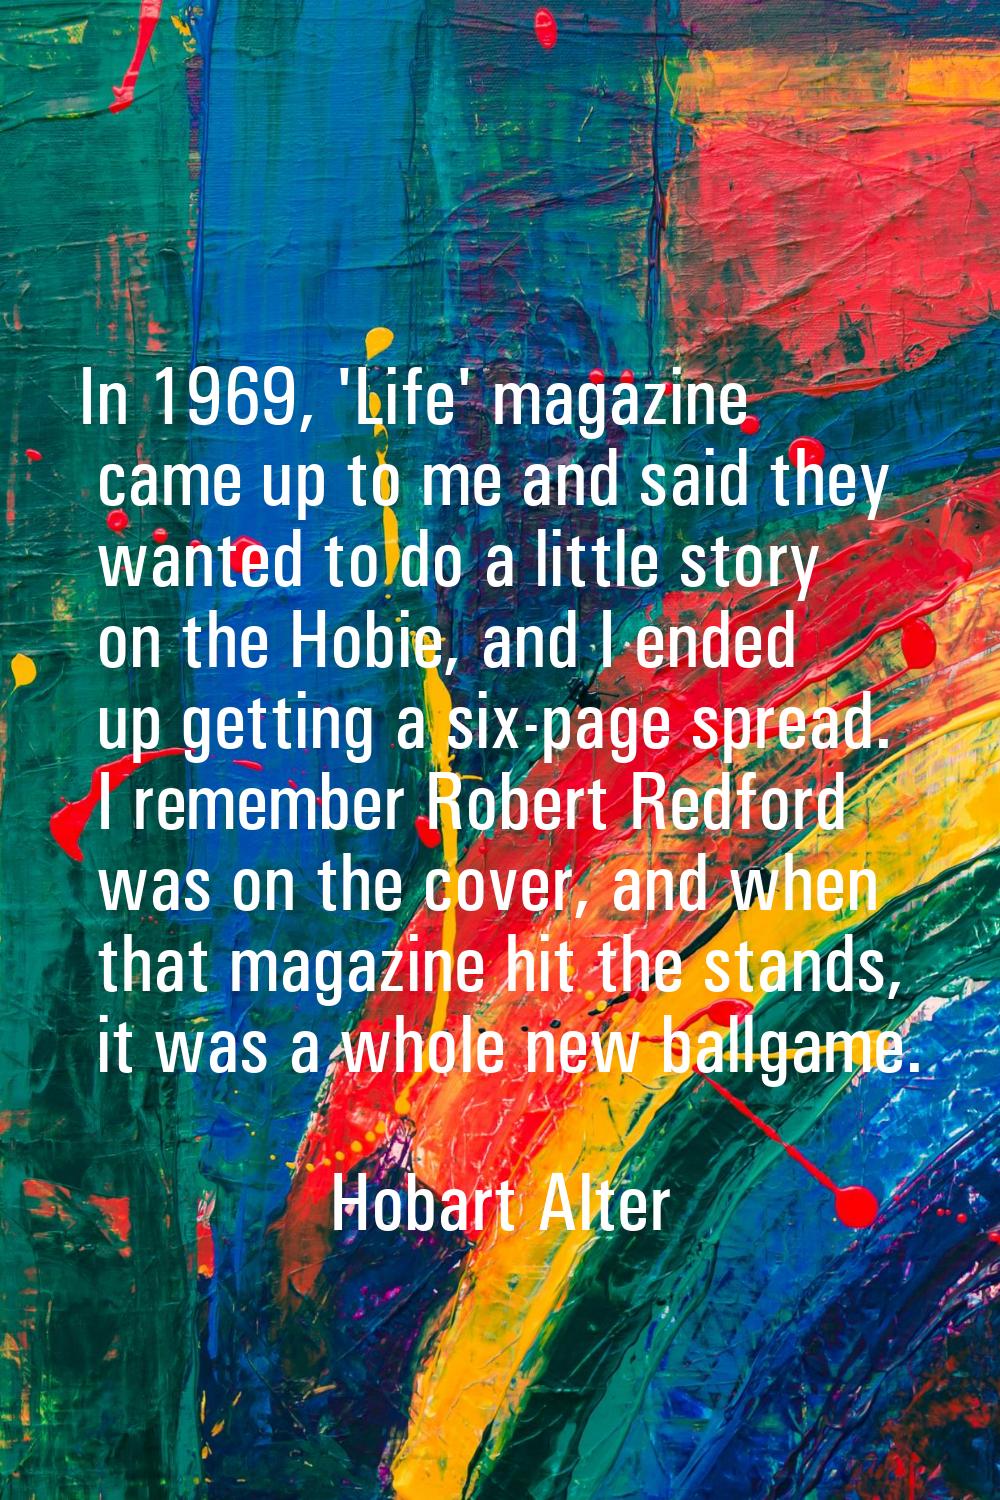 In 1969, 'Life' magazine came up to me and said they wanted to do a little story on the Hobie, and 